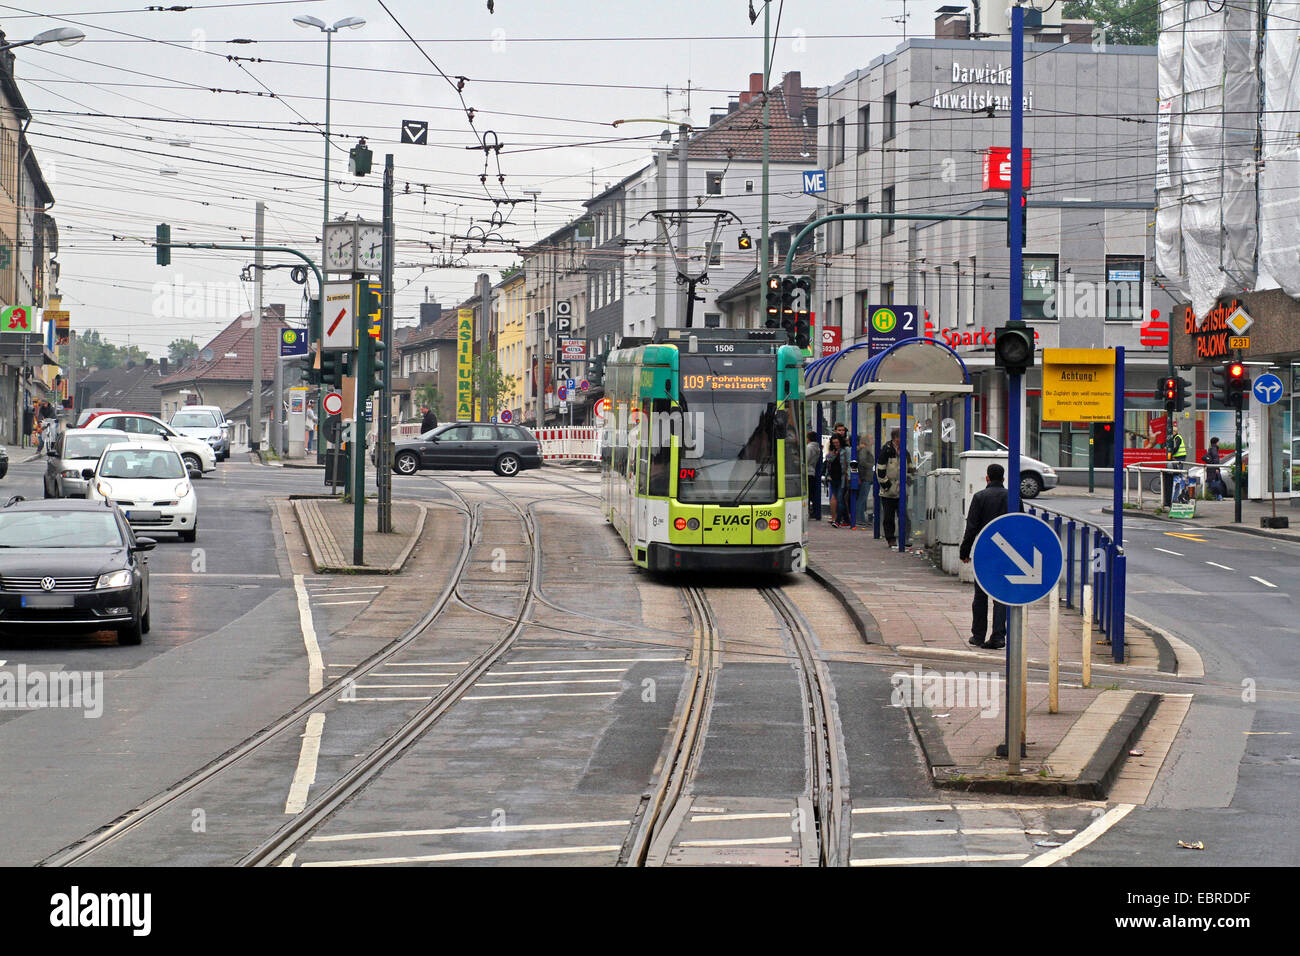 street with tram and tram station, Germany Stock Photo